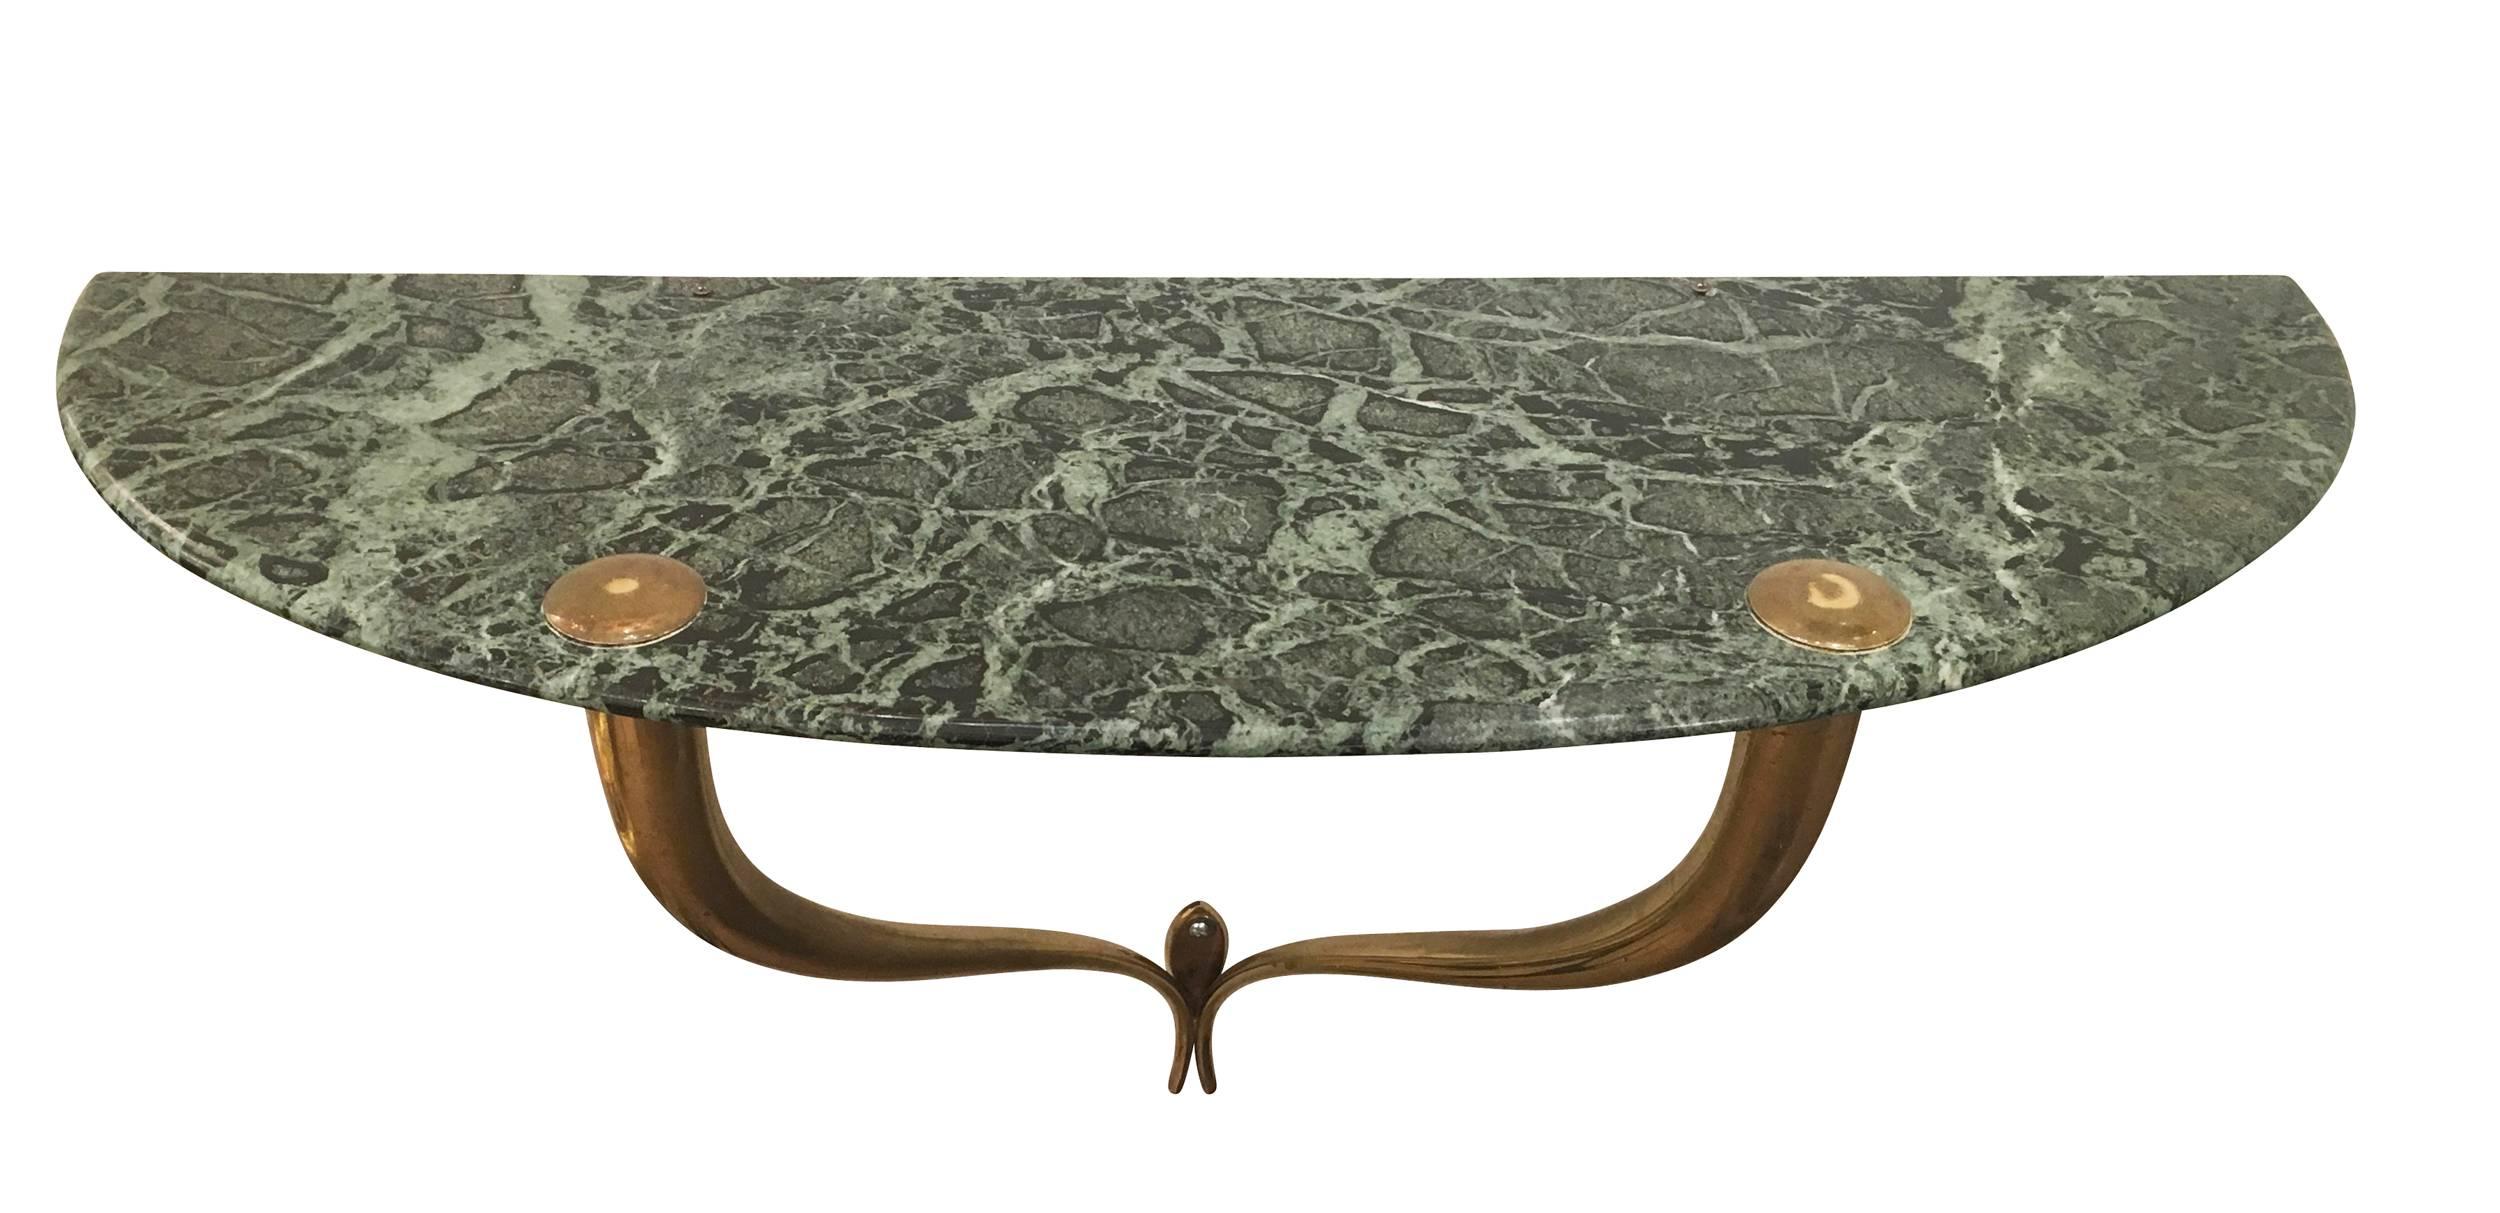 Beautiful wall-mounted console in the manner of Osvaldo Borsani from the 1950s. Its features a green marble top on a brass frame.